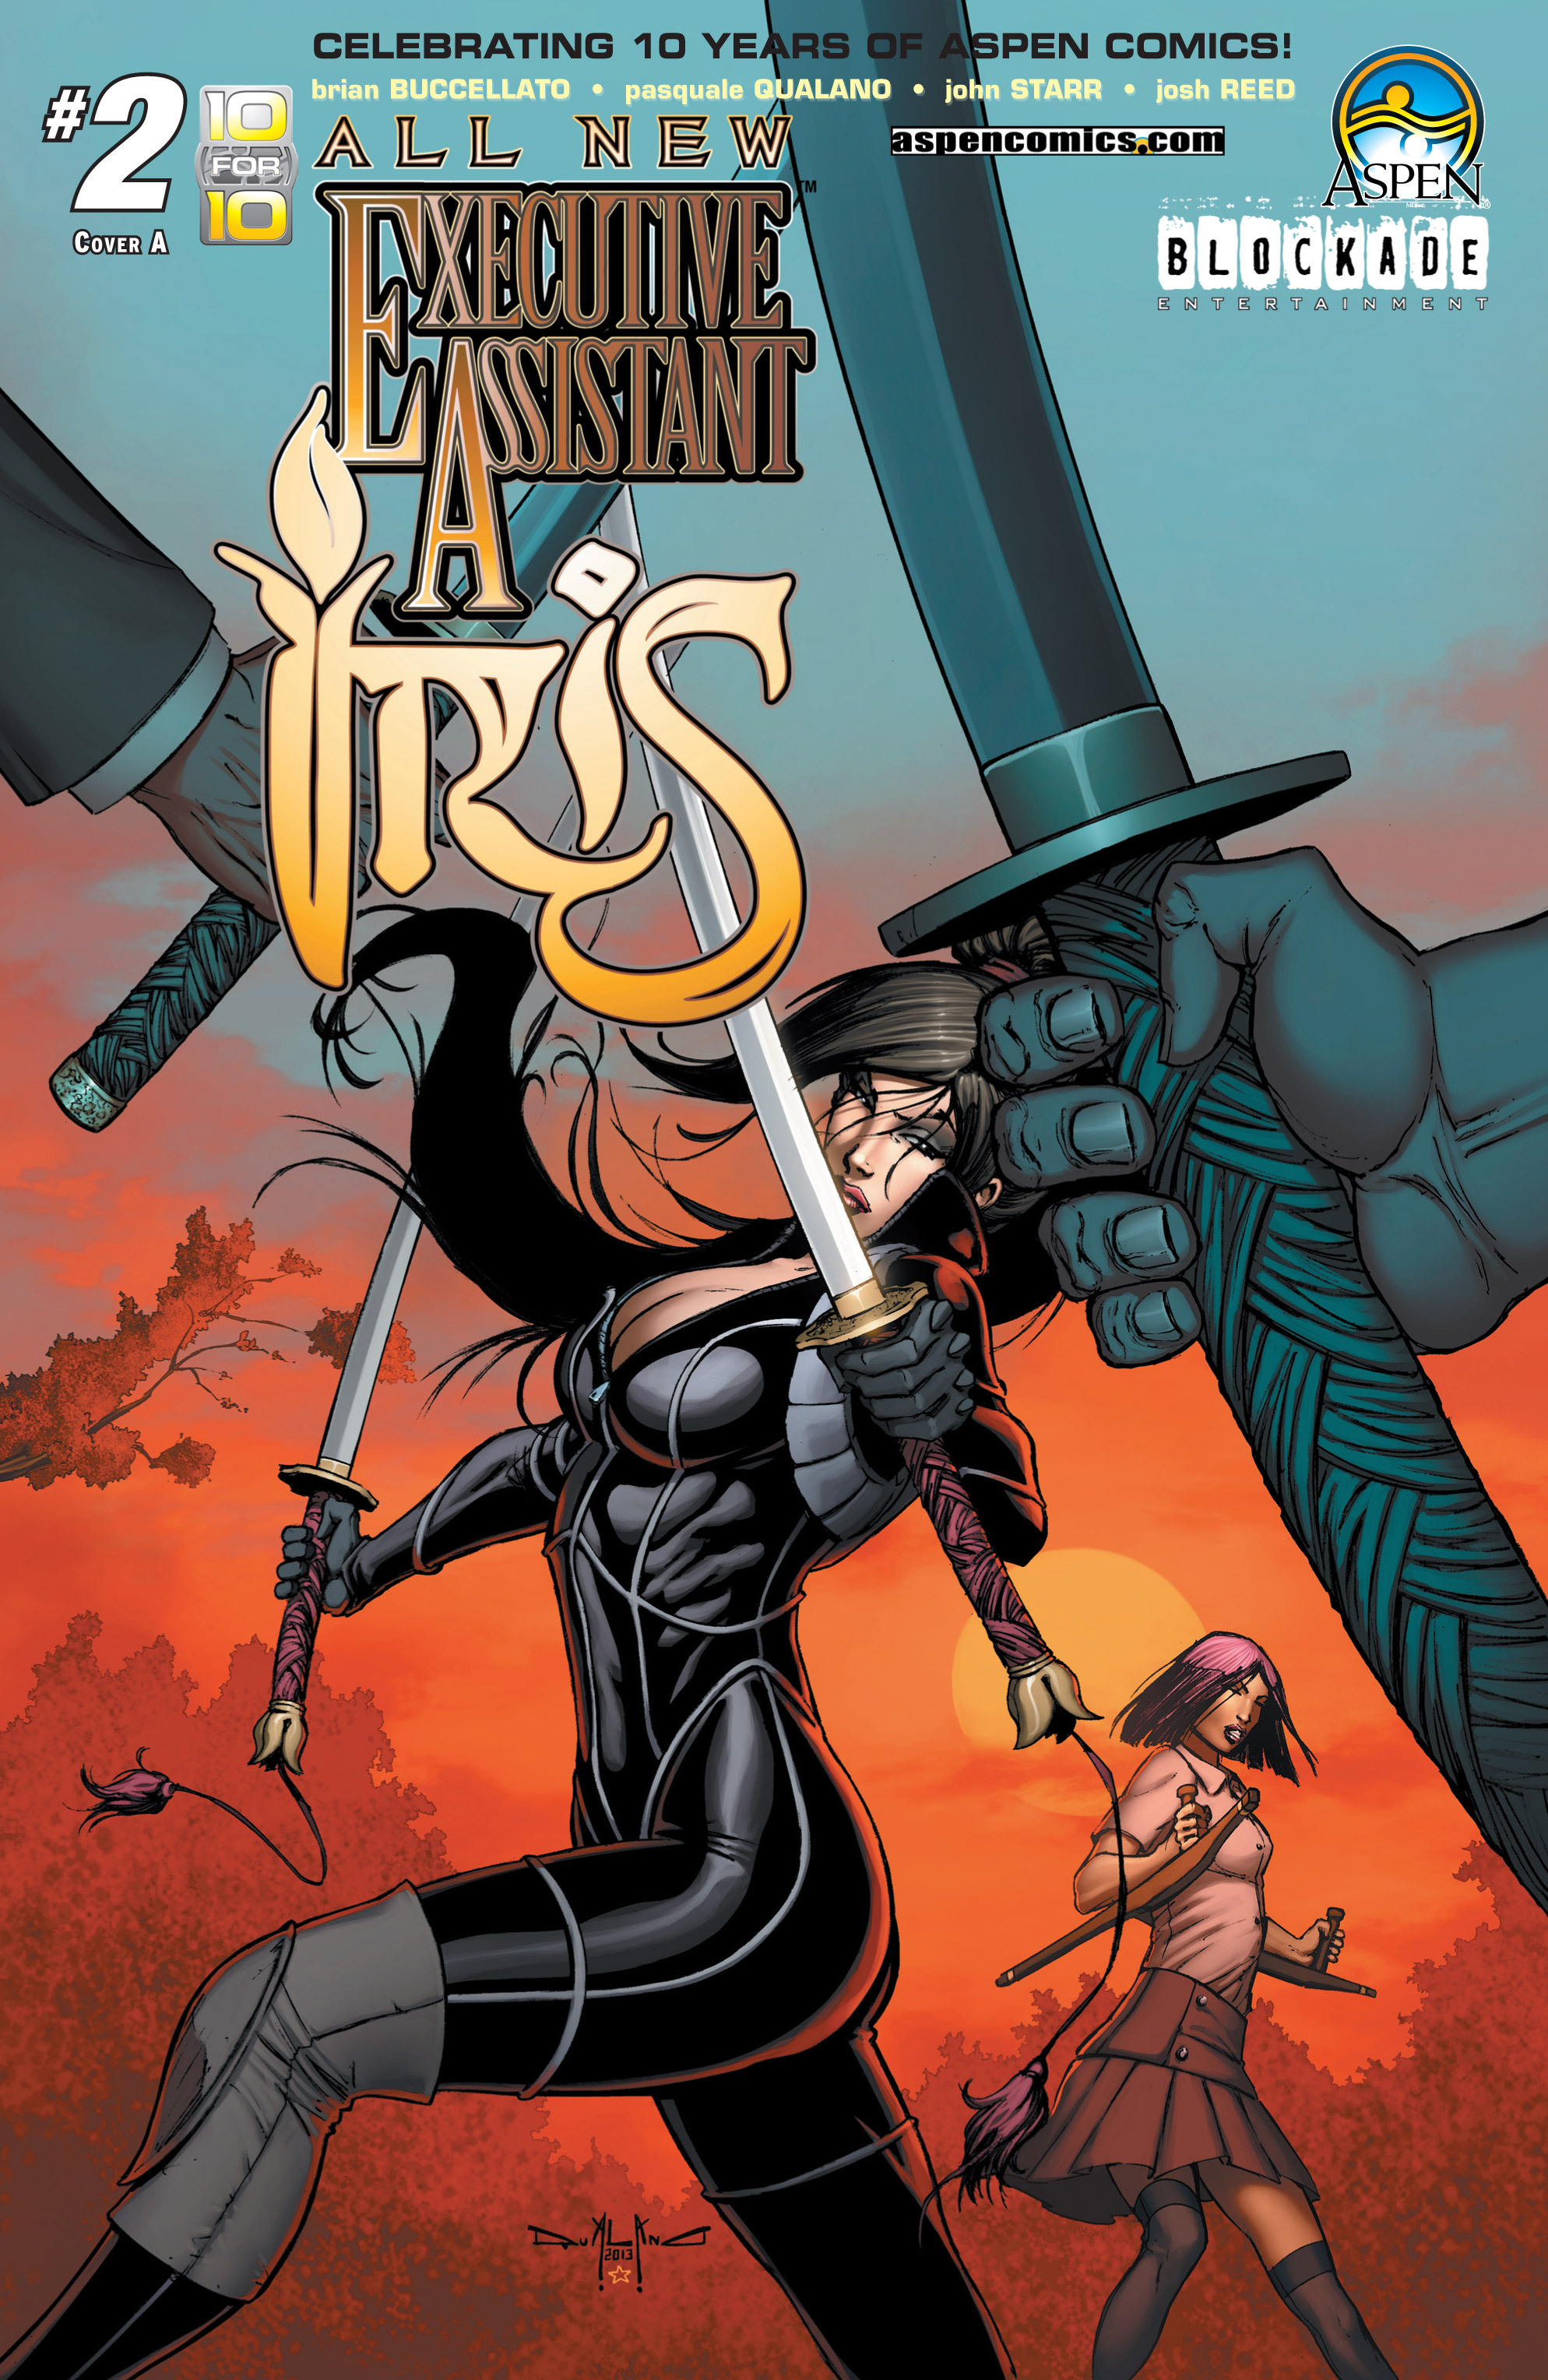 Read online All New Executive Assistant: Iris comic -  Issue # TPB - 26